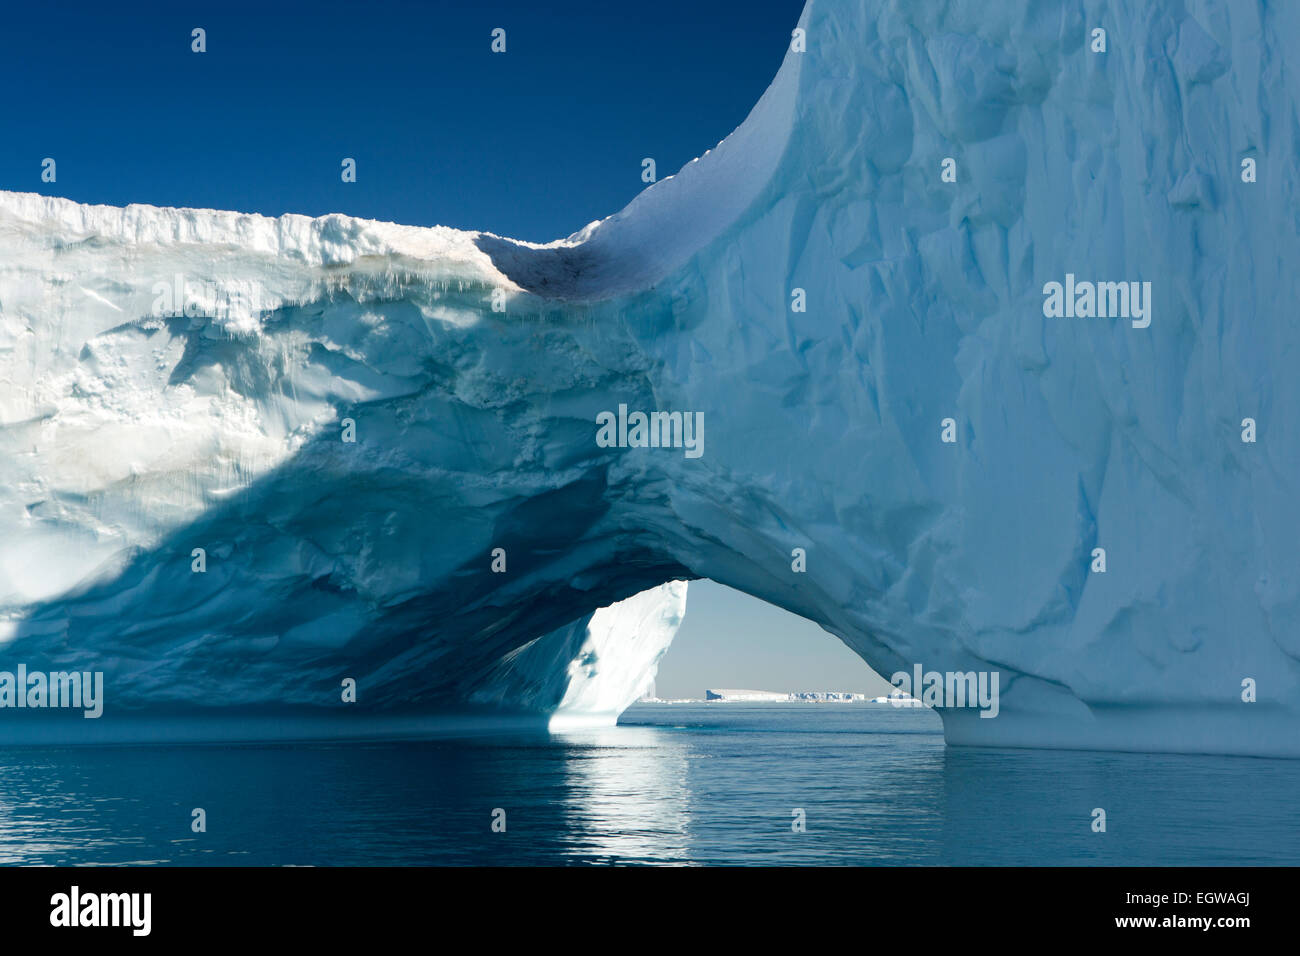 Antarctica, Weddell Sea, large Antarctic iceberg with natural arch through Stock Photo